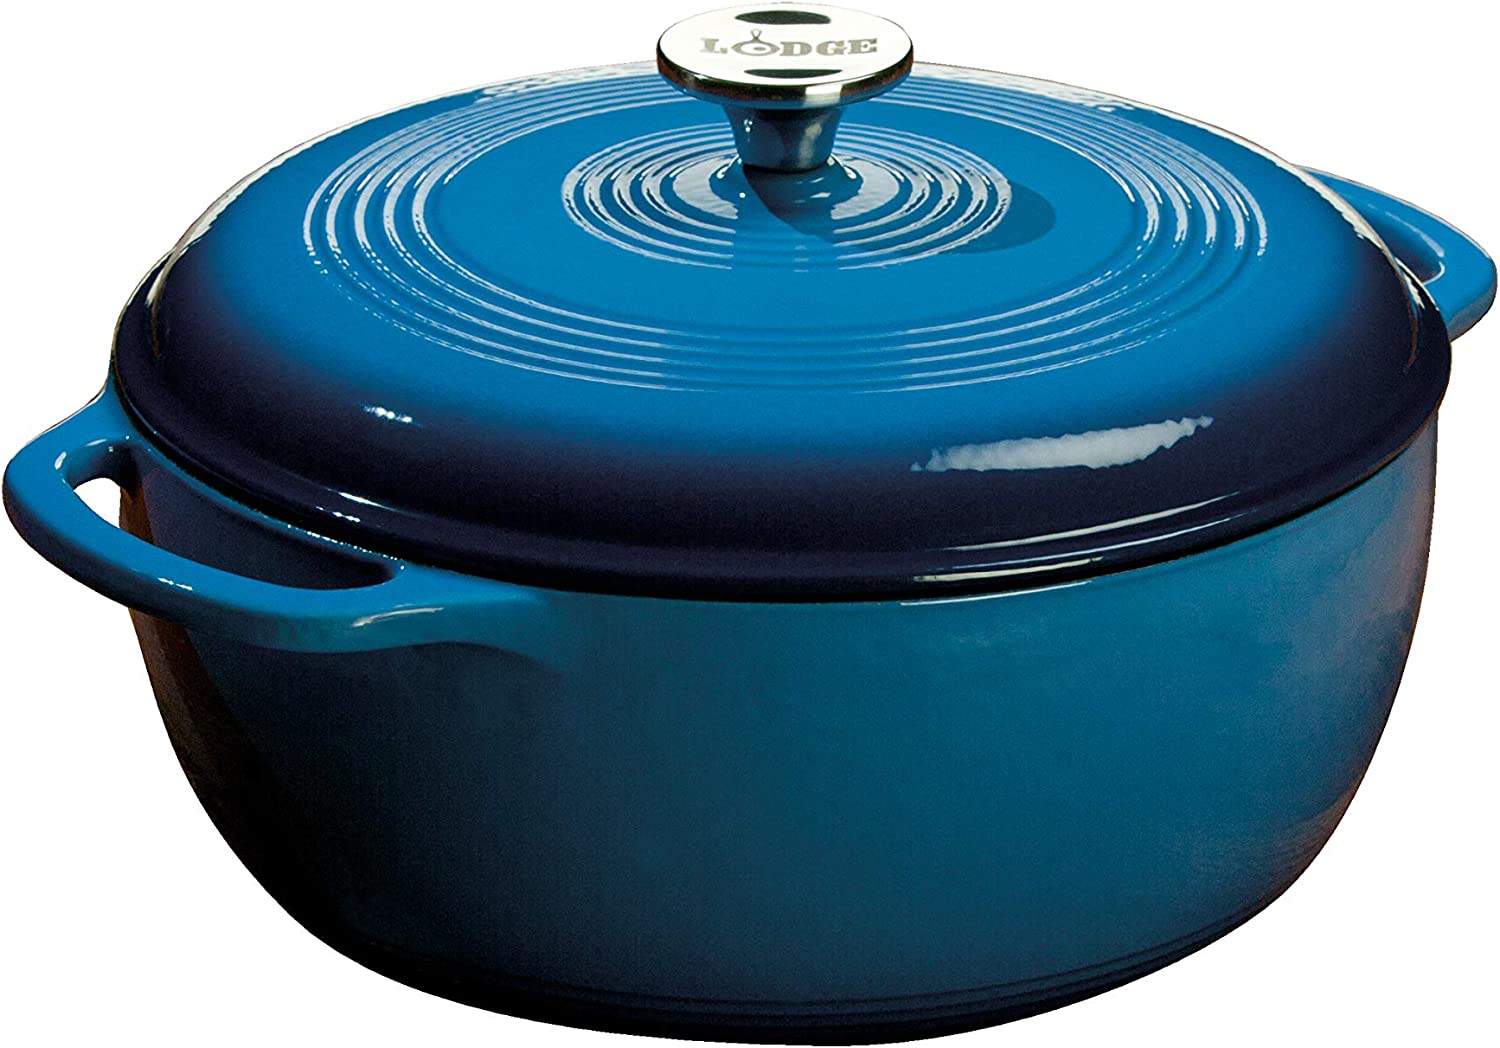 https://bigbigmart.com/wp-content/uploads/2023/07/Lodge-6-Quart-Enameled-Cast-Iron-Dutch-Oven-with-Lid-%E2%80%93-Dual-Handles-%E2%80%93-Oven-Safe-up-to-500%C2%B0-F-or-on-Stovetop-Use-to-Marinate-Cook-Bake-Refrigerate-and-Serve-%E2%80%93-Blue.jpg